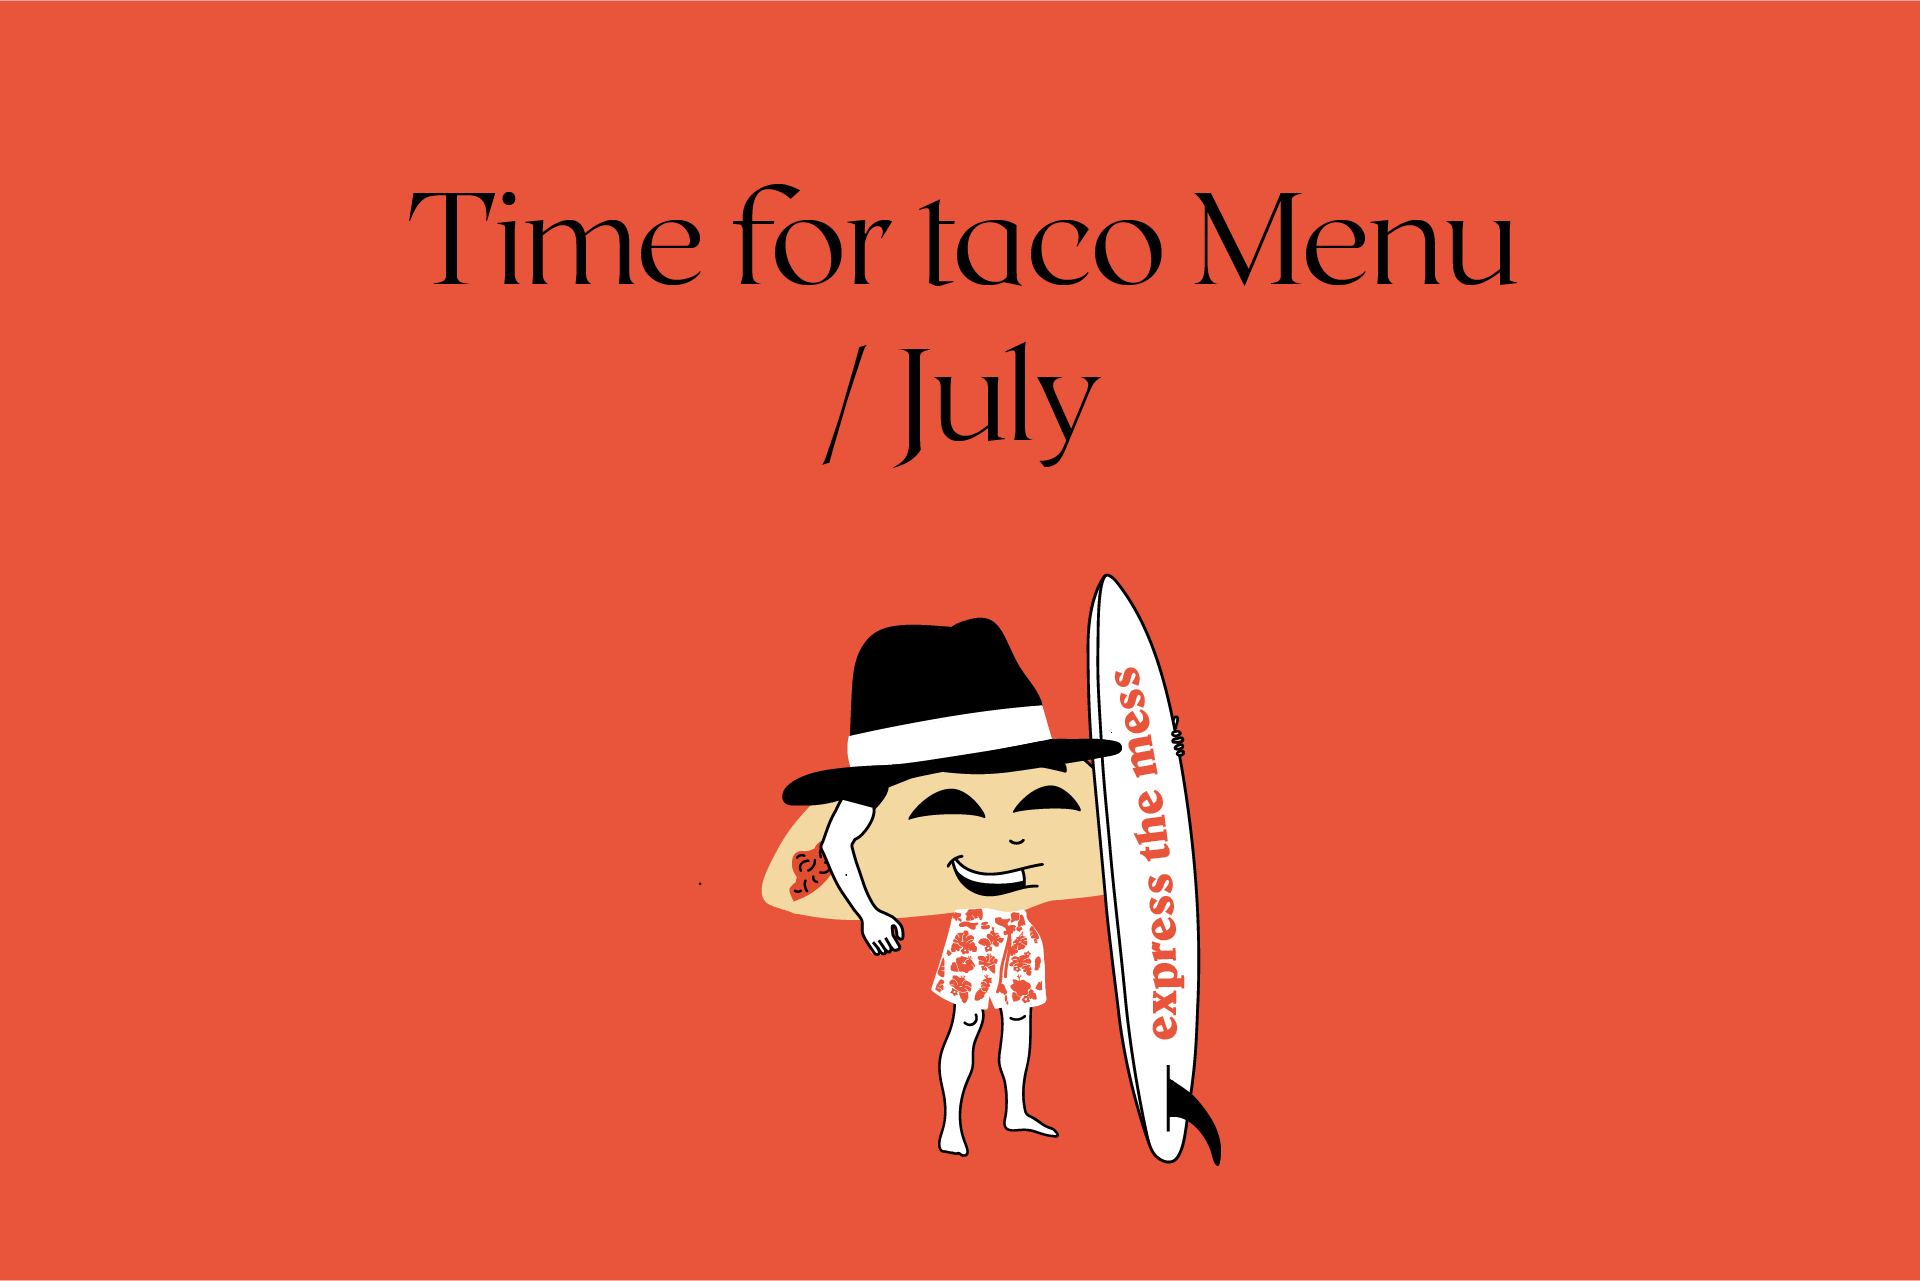 Time for taco Menu / July